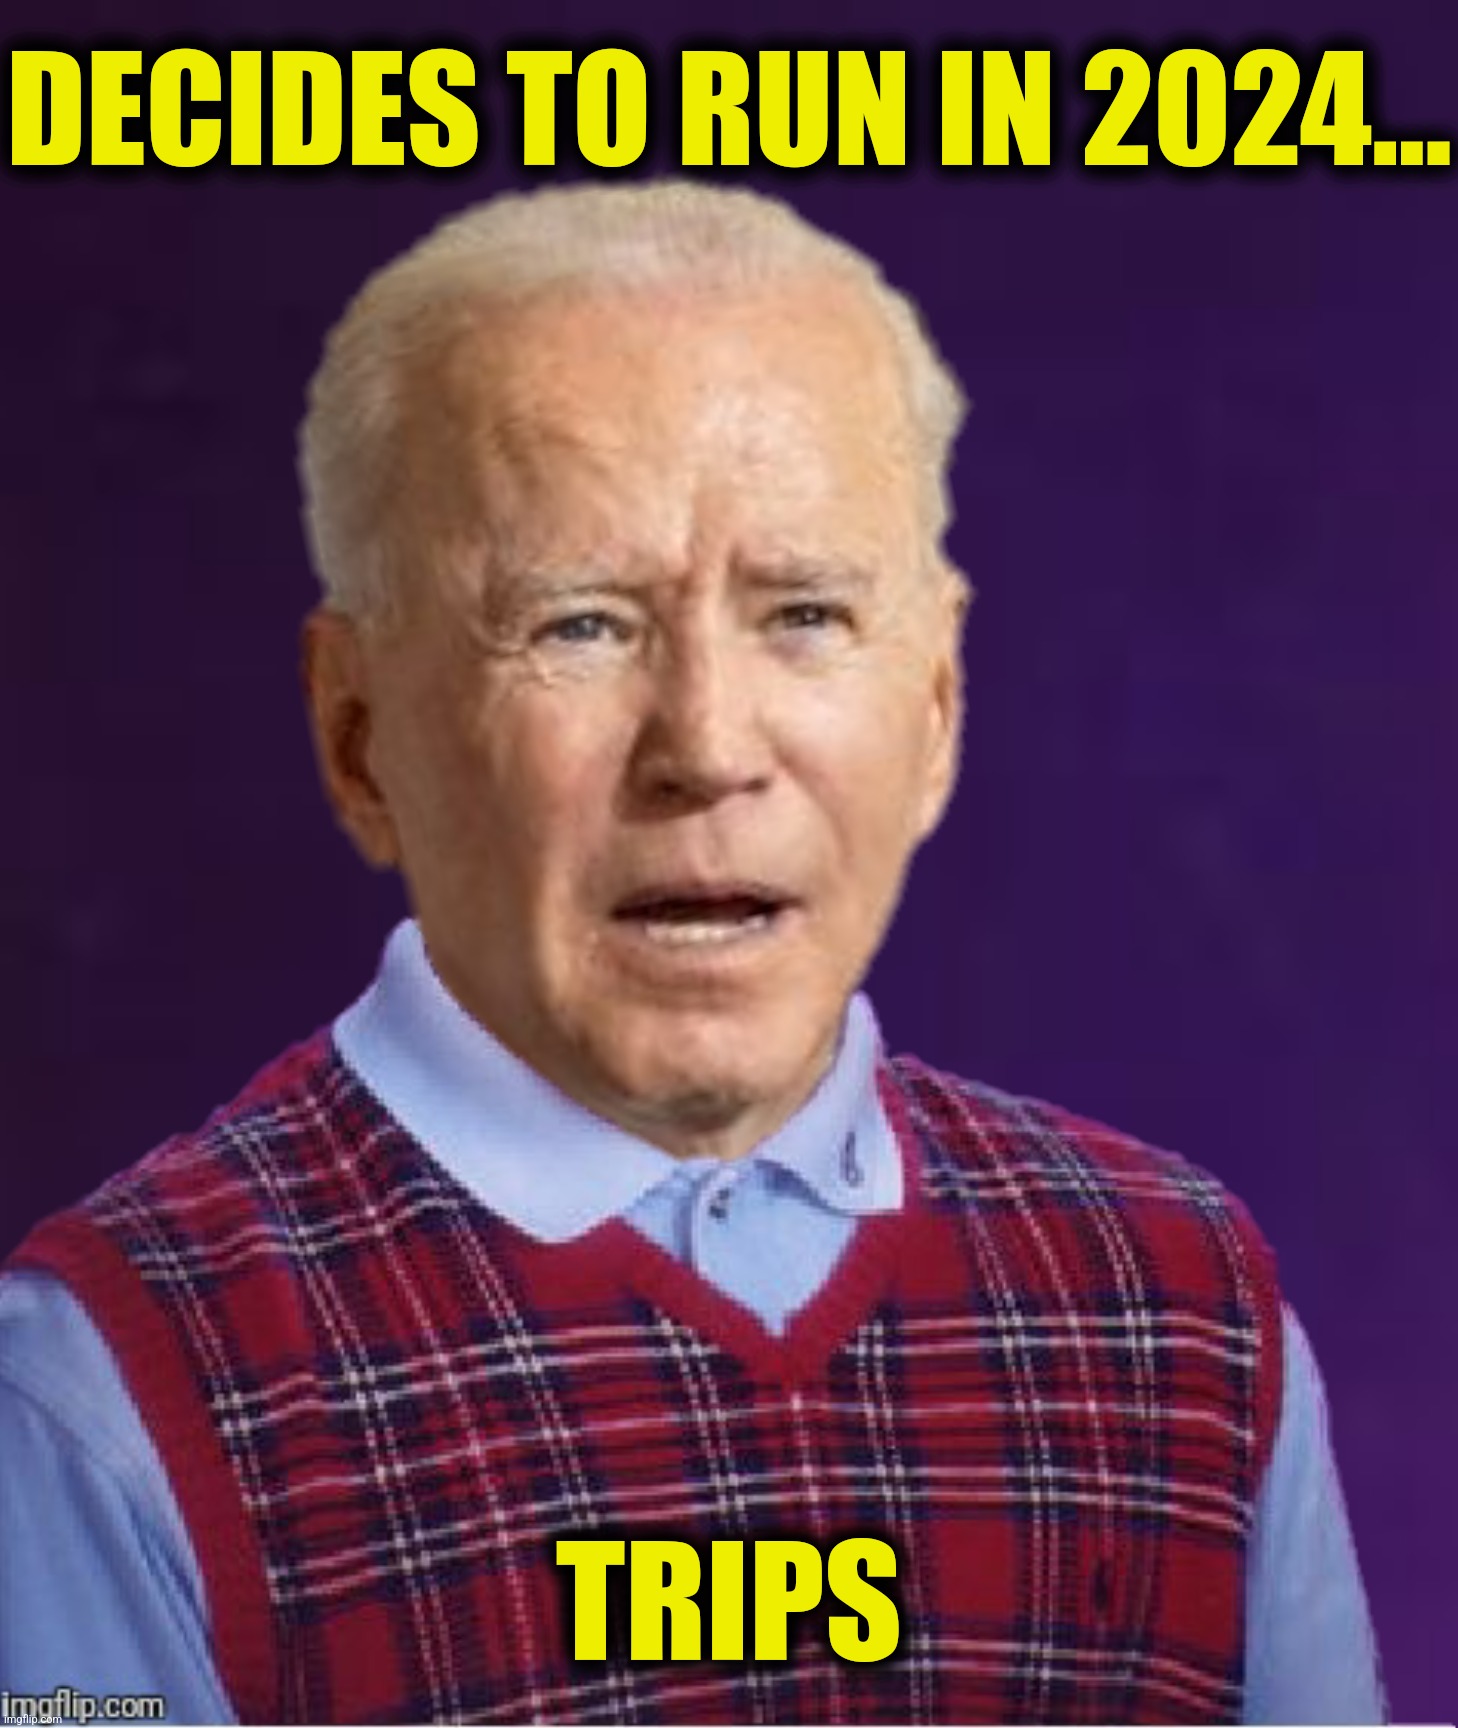 Joe fell down and broke his crown and Jill came tumbling after | DECIDES TO RUN IN 2024... TRIPS | image tagged in bad photoshop,joe biden,bad luck brian,trip | made w/ Imgflip meme maker